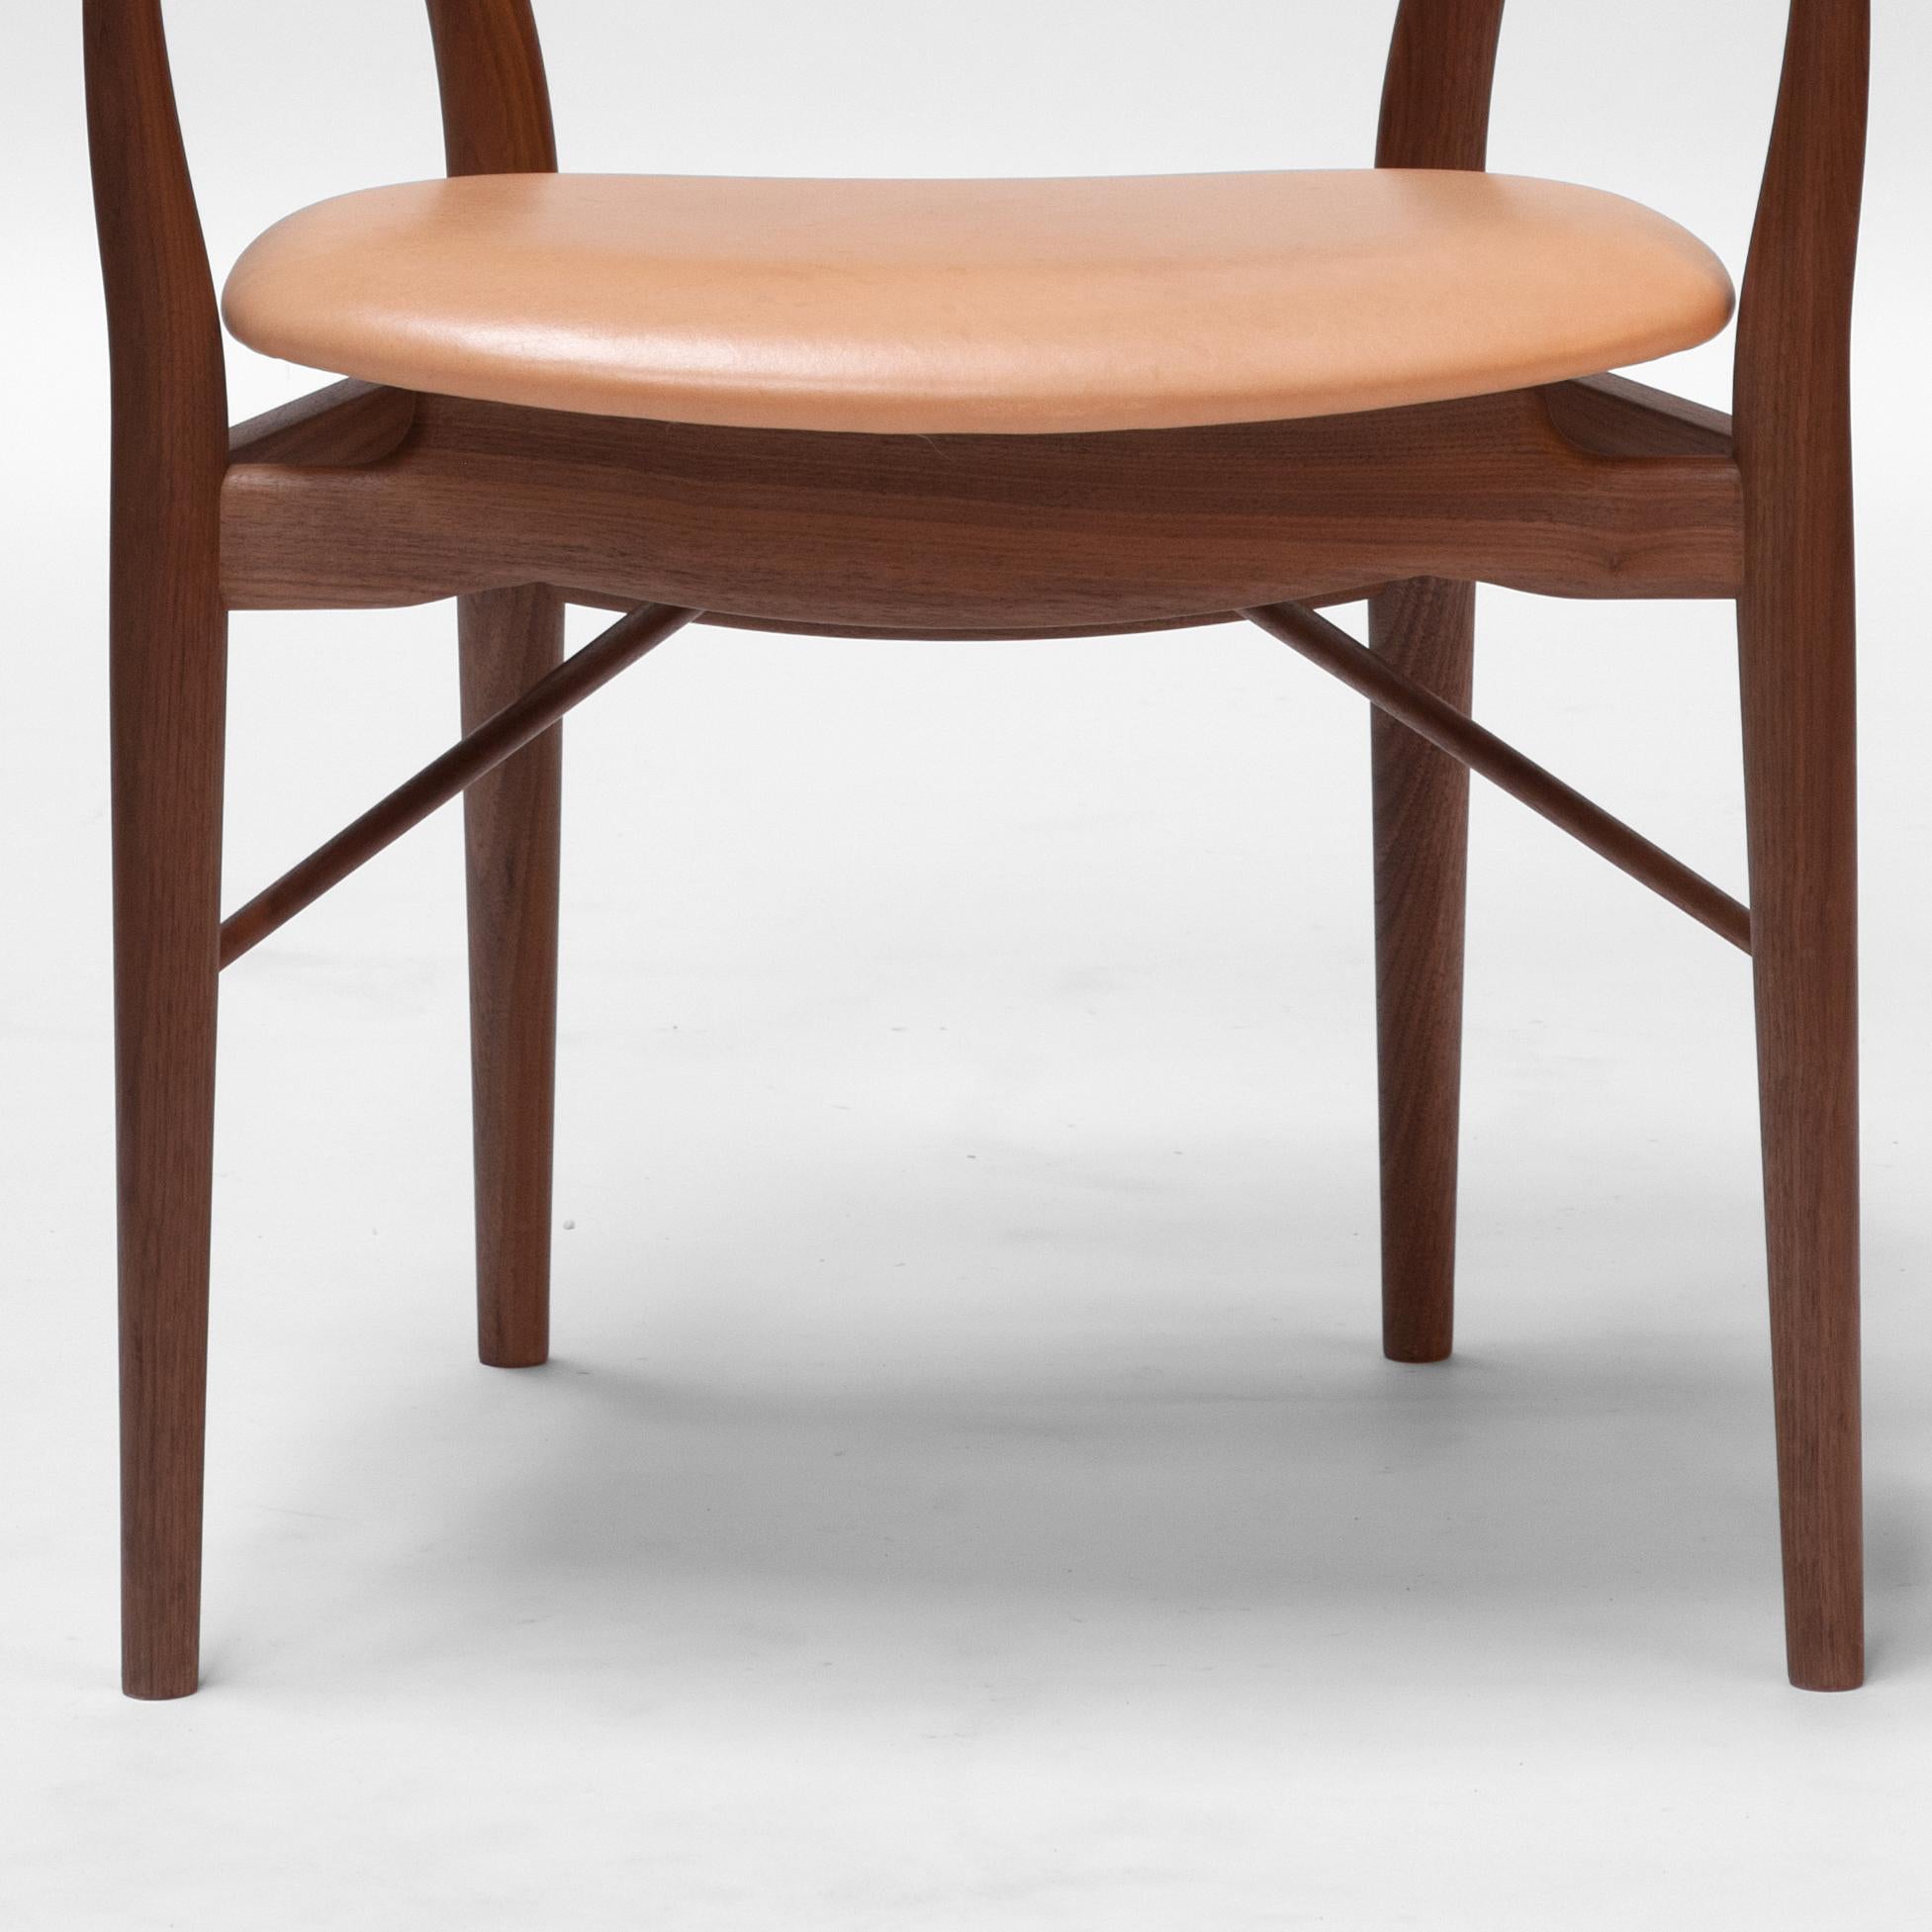 Chair designed by Finn Juhl in 1946, relaunched in 2018.
Manufactured by House of Finn Juhl in Denmark.

This chair is an example of Finn Juhl’s most beautiful work. It was originally designed in 1946 for the Copenhagen Cabinetmakers’ Guild